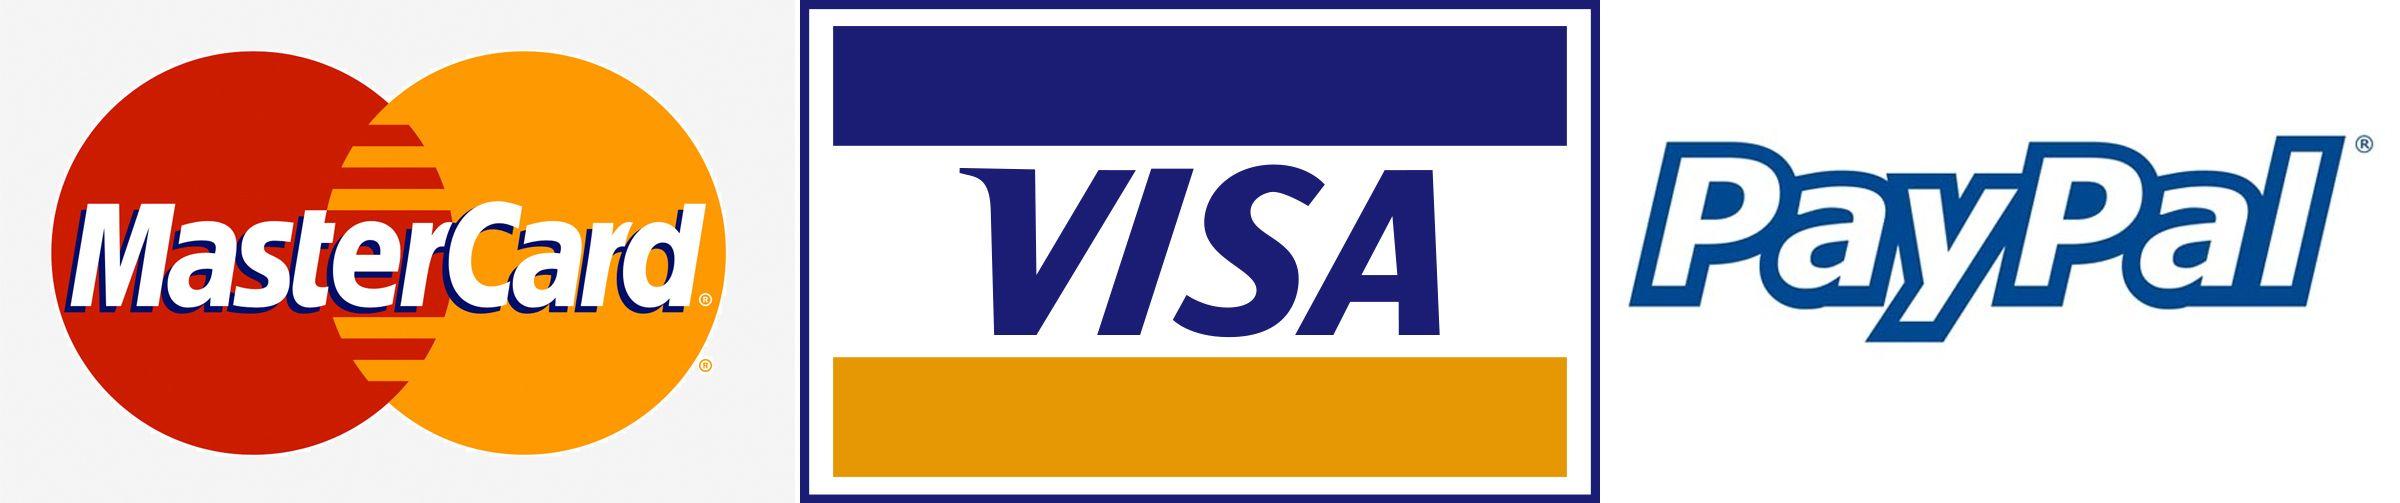 PayPal Visa MasterCard Logo - Make your reservations and bookings with Paypal